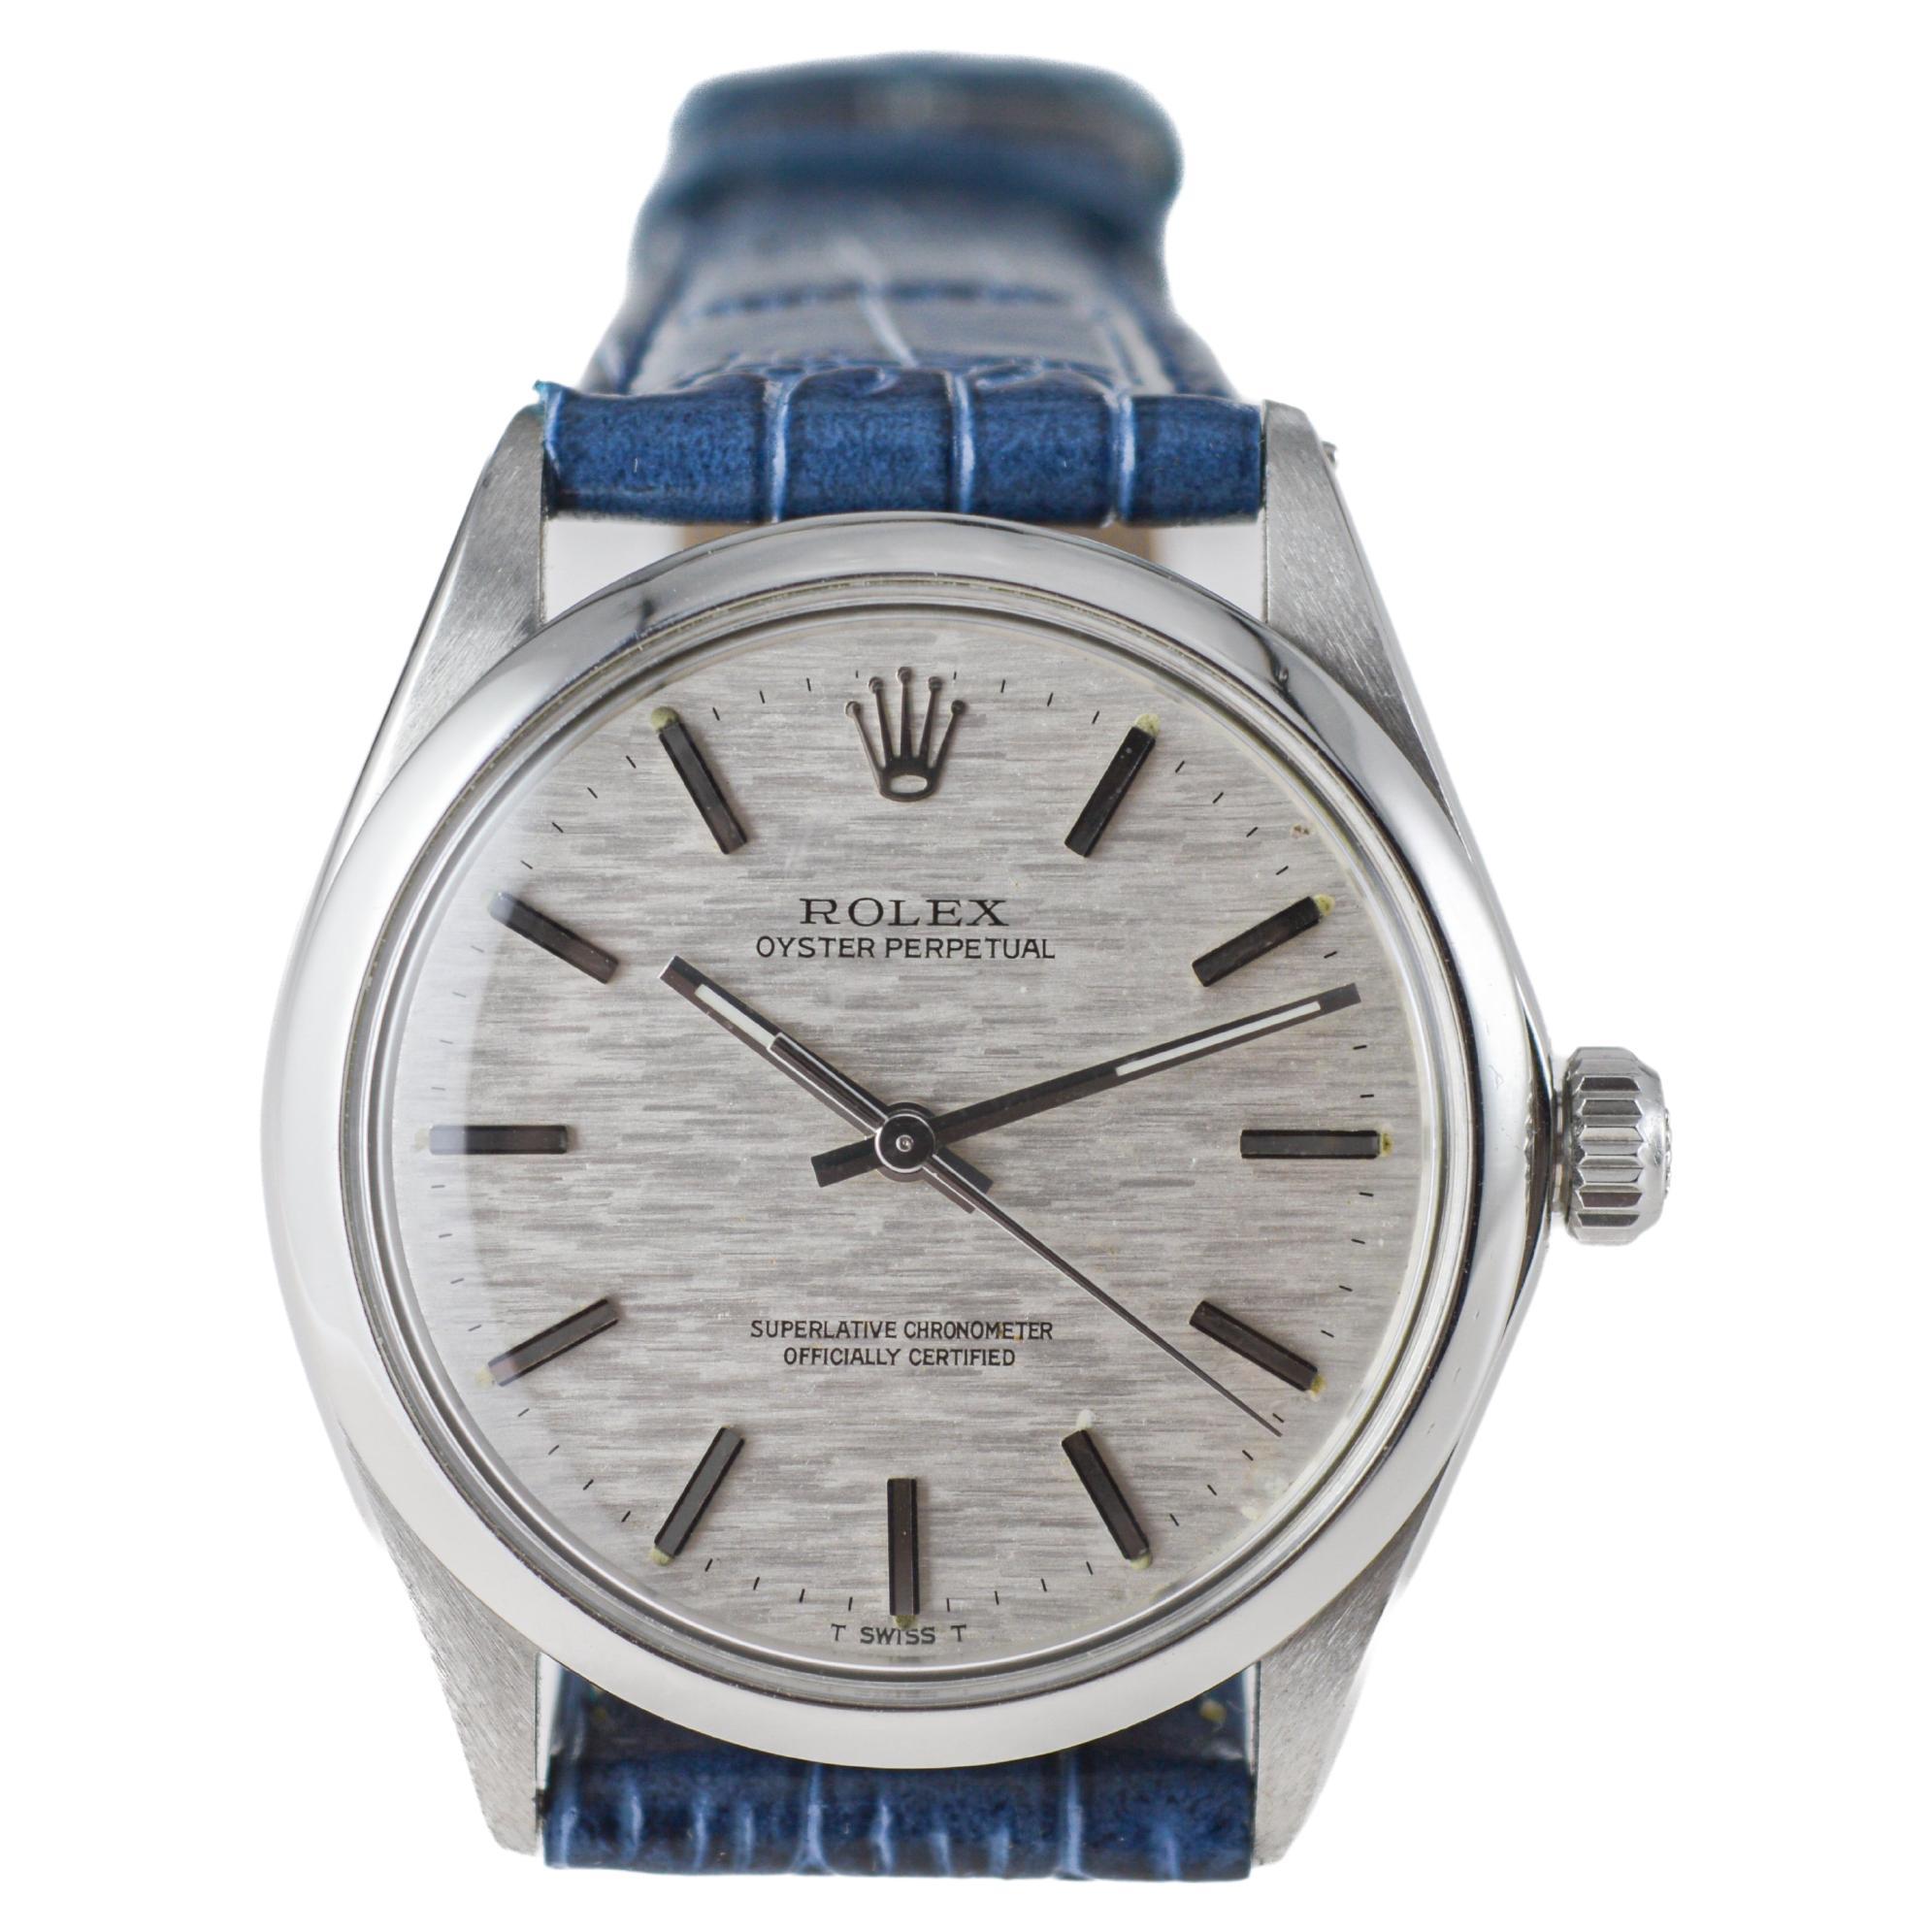 Rolex Steel Oyster Perpetual with Factory Original Mosaic Dial circa 1973 / 74 For Sale 1